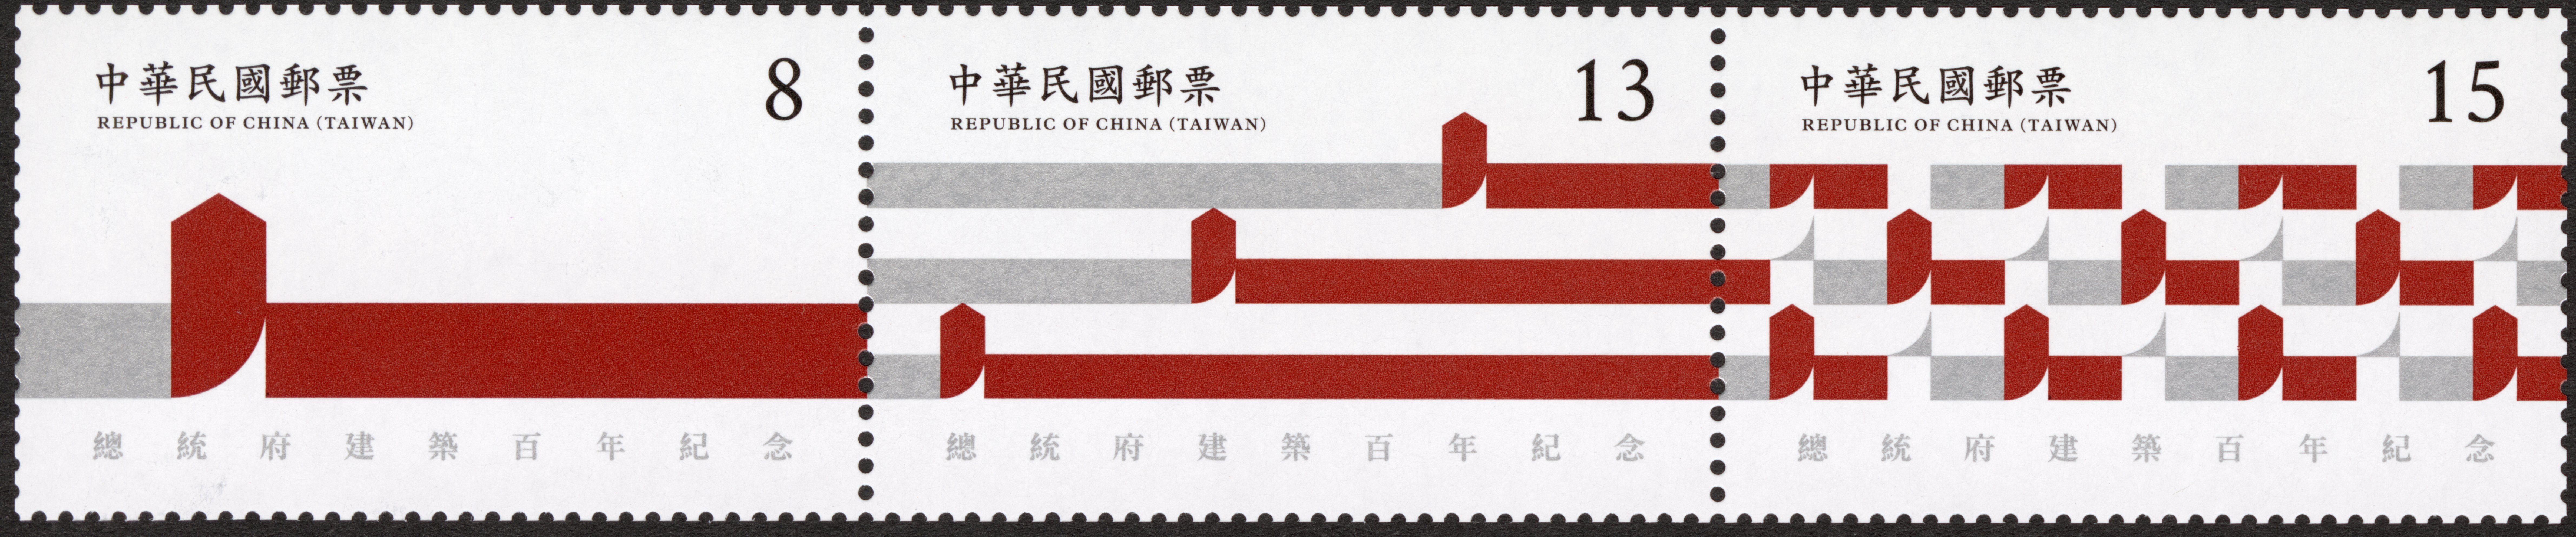 100th Anniversary of the Presidential Office Building Stamps